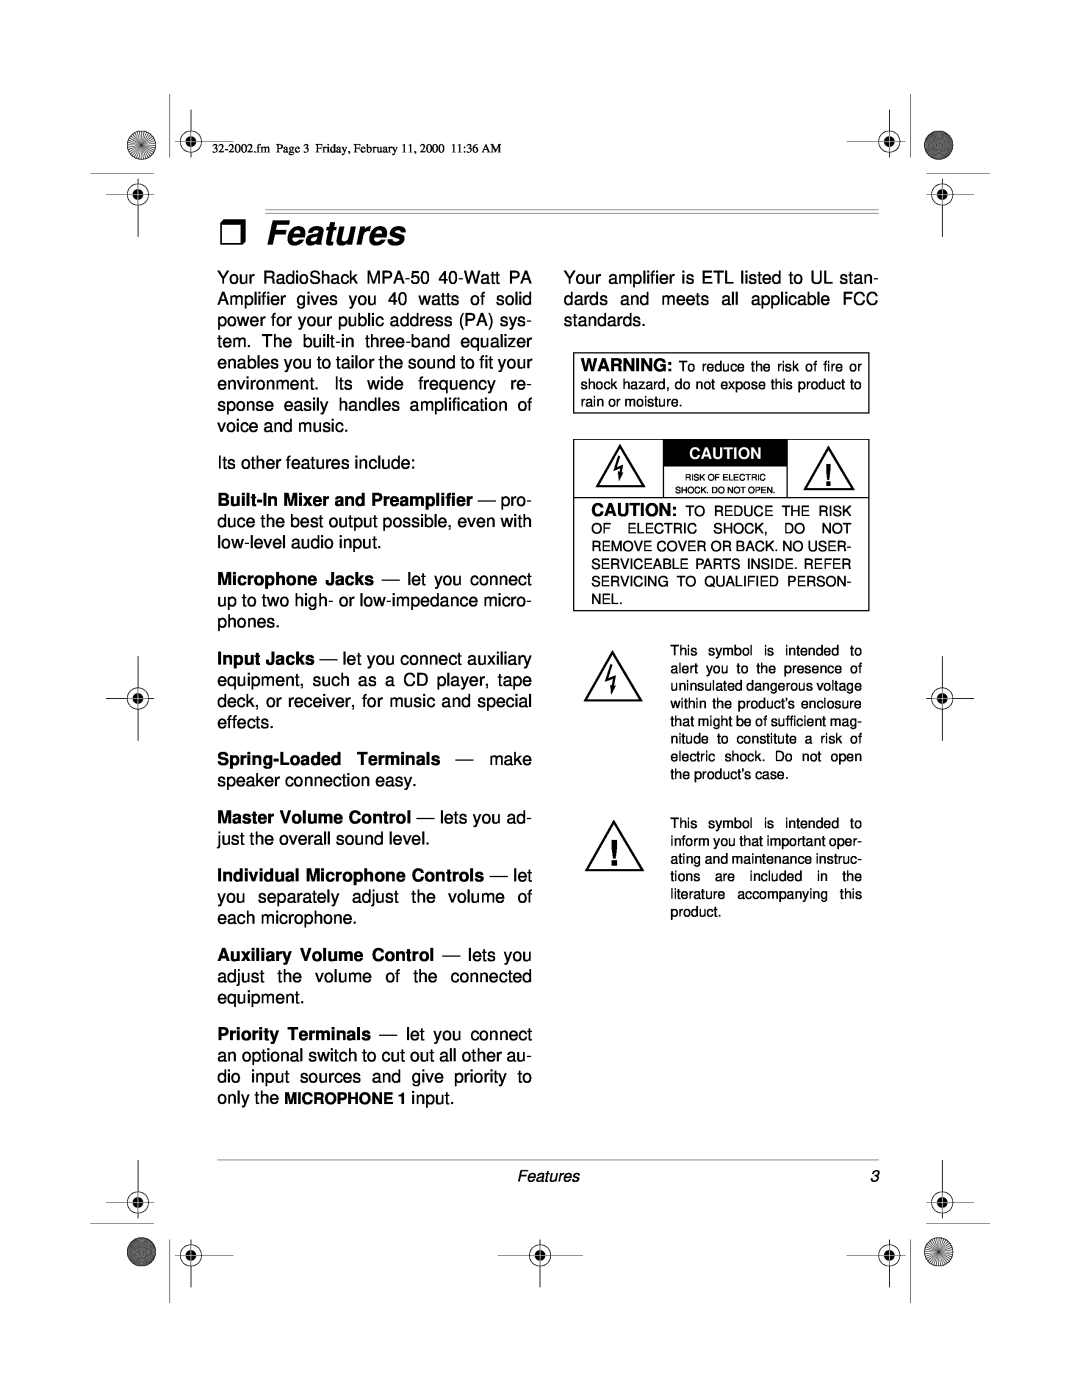 Radio Shack MPA-50 owner manual ˆFeatures 